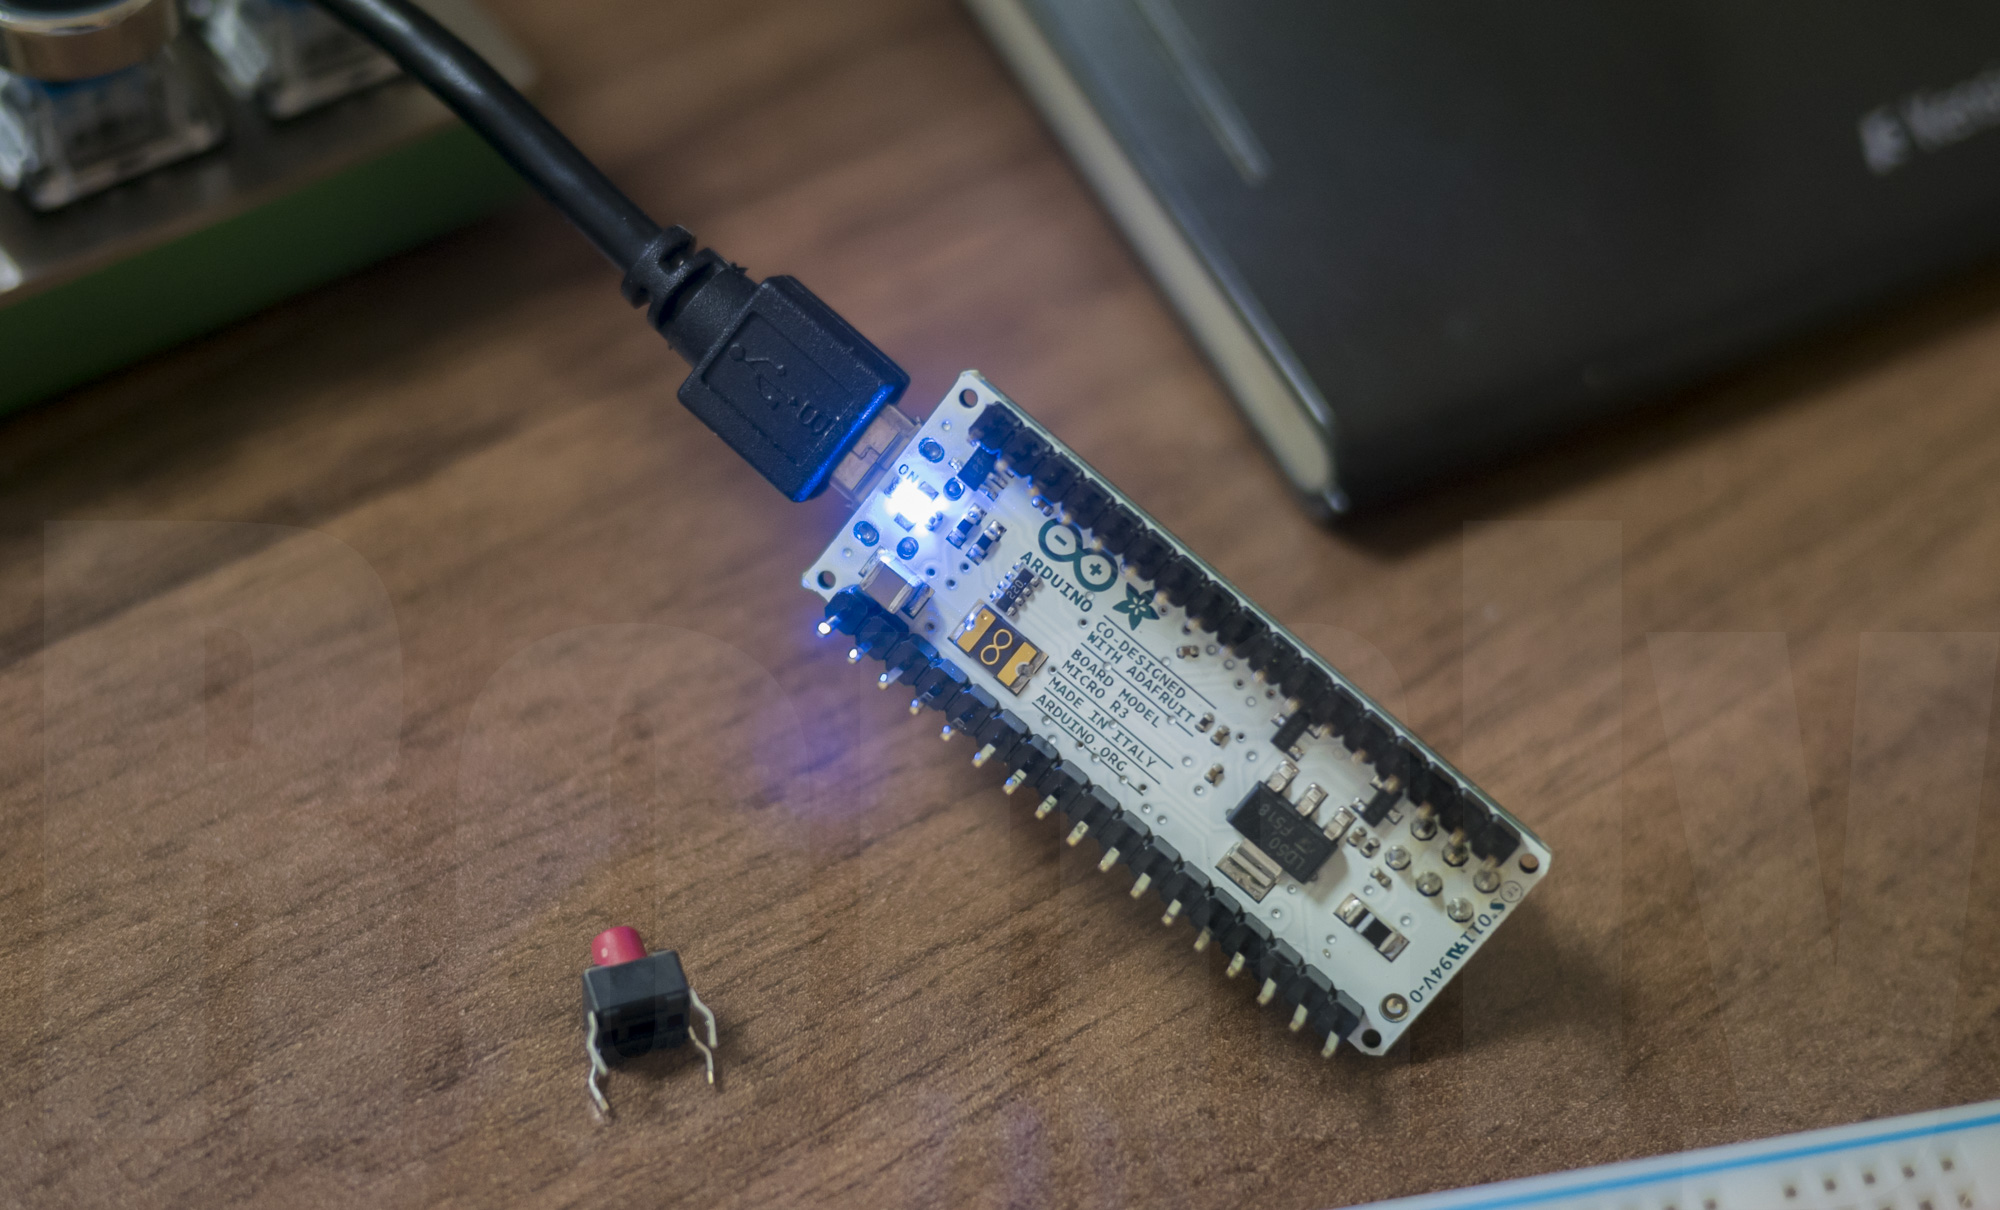 Arduino connected to the PC